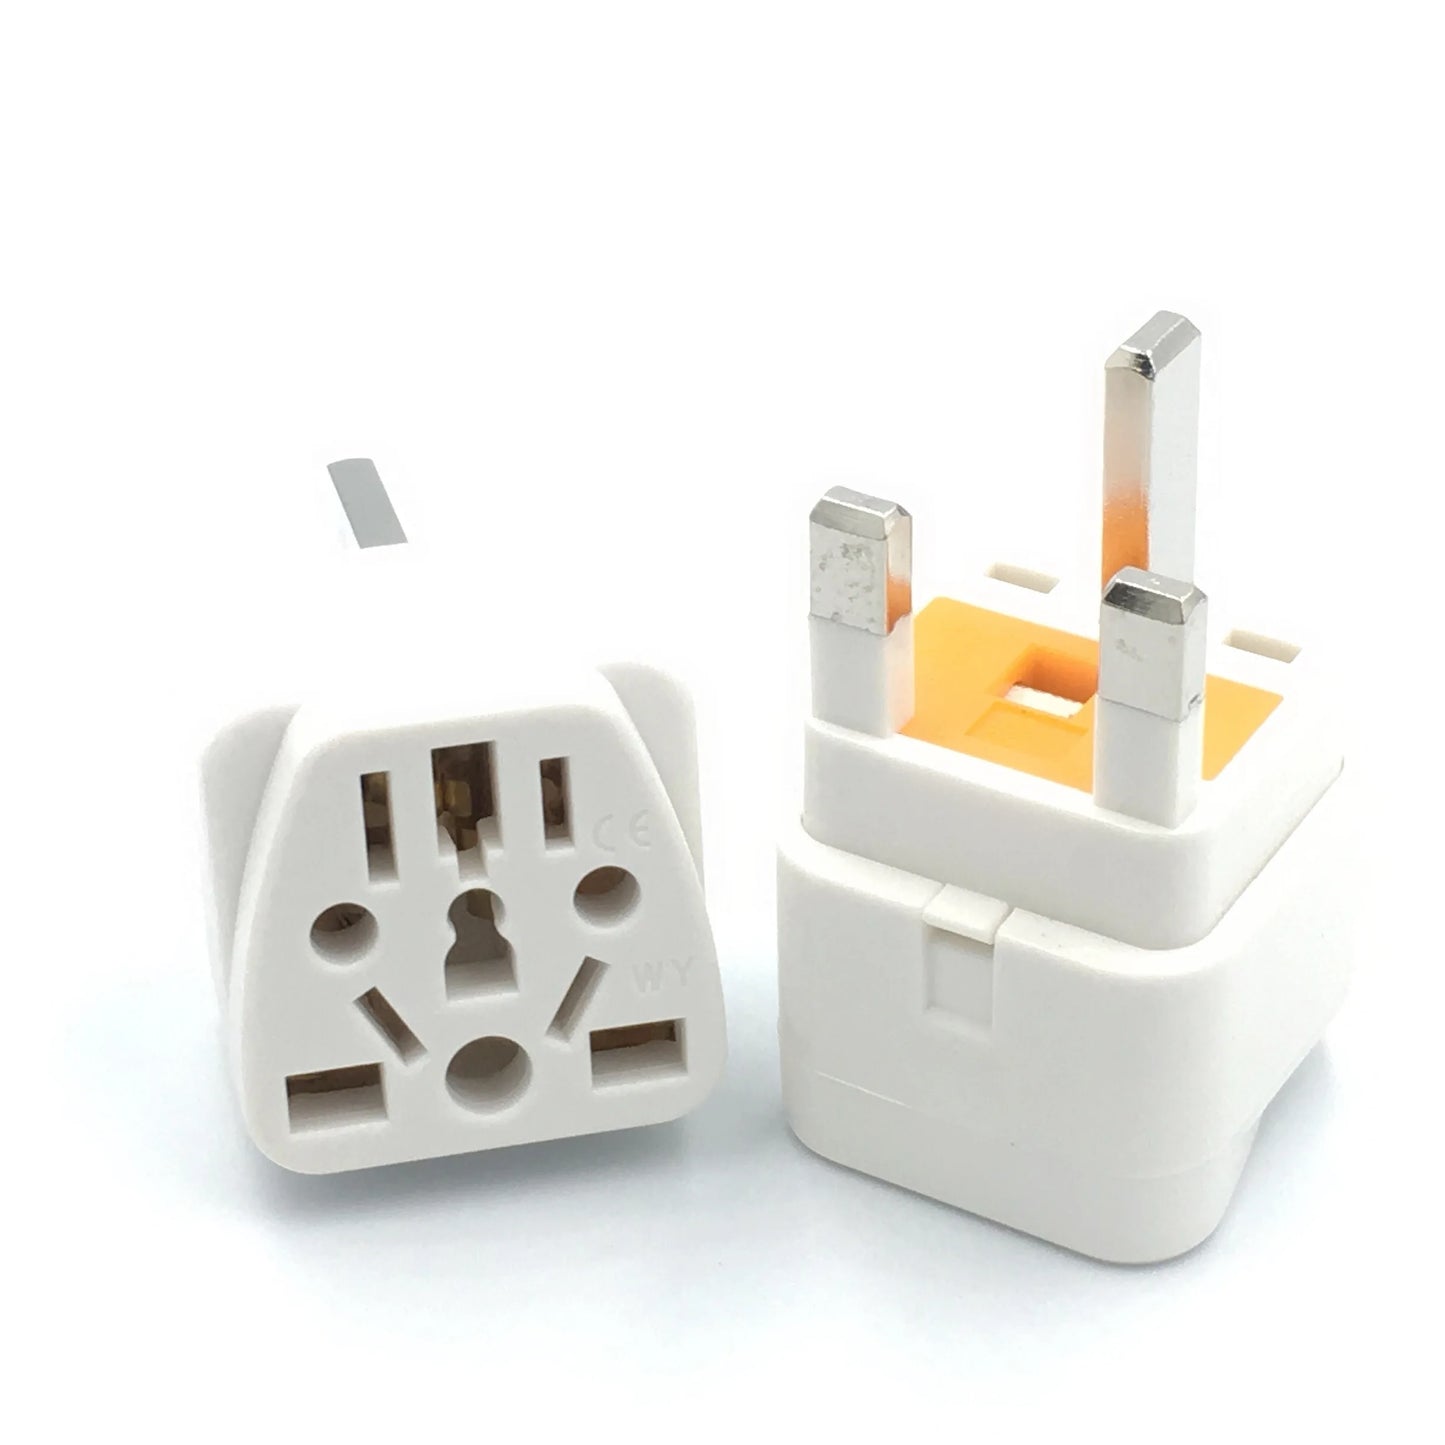 UK Travel Plug Adapter Type G Multi-type Conversion Outlet Socket To Britain Singapore Malaysia Power Converter With Fuse 13A